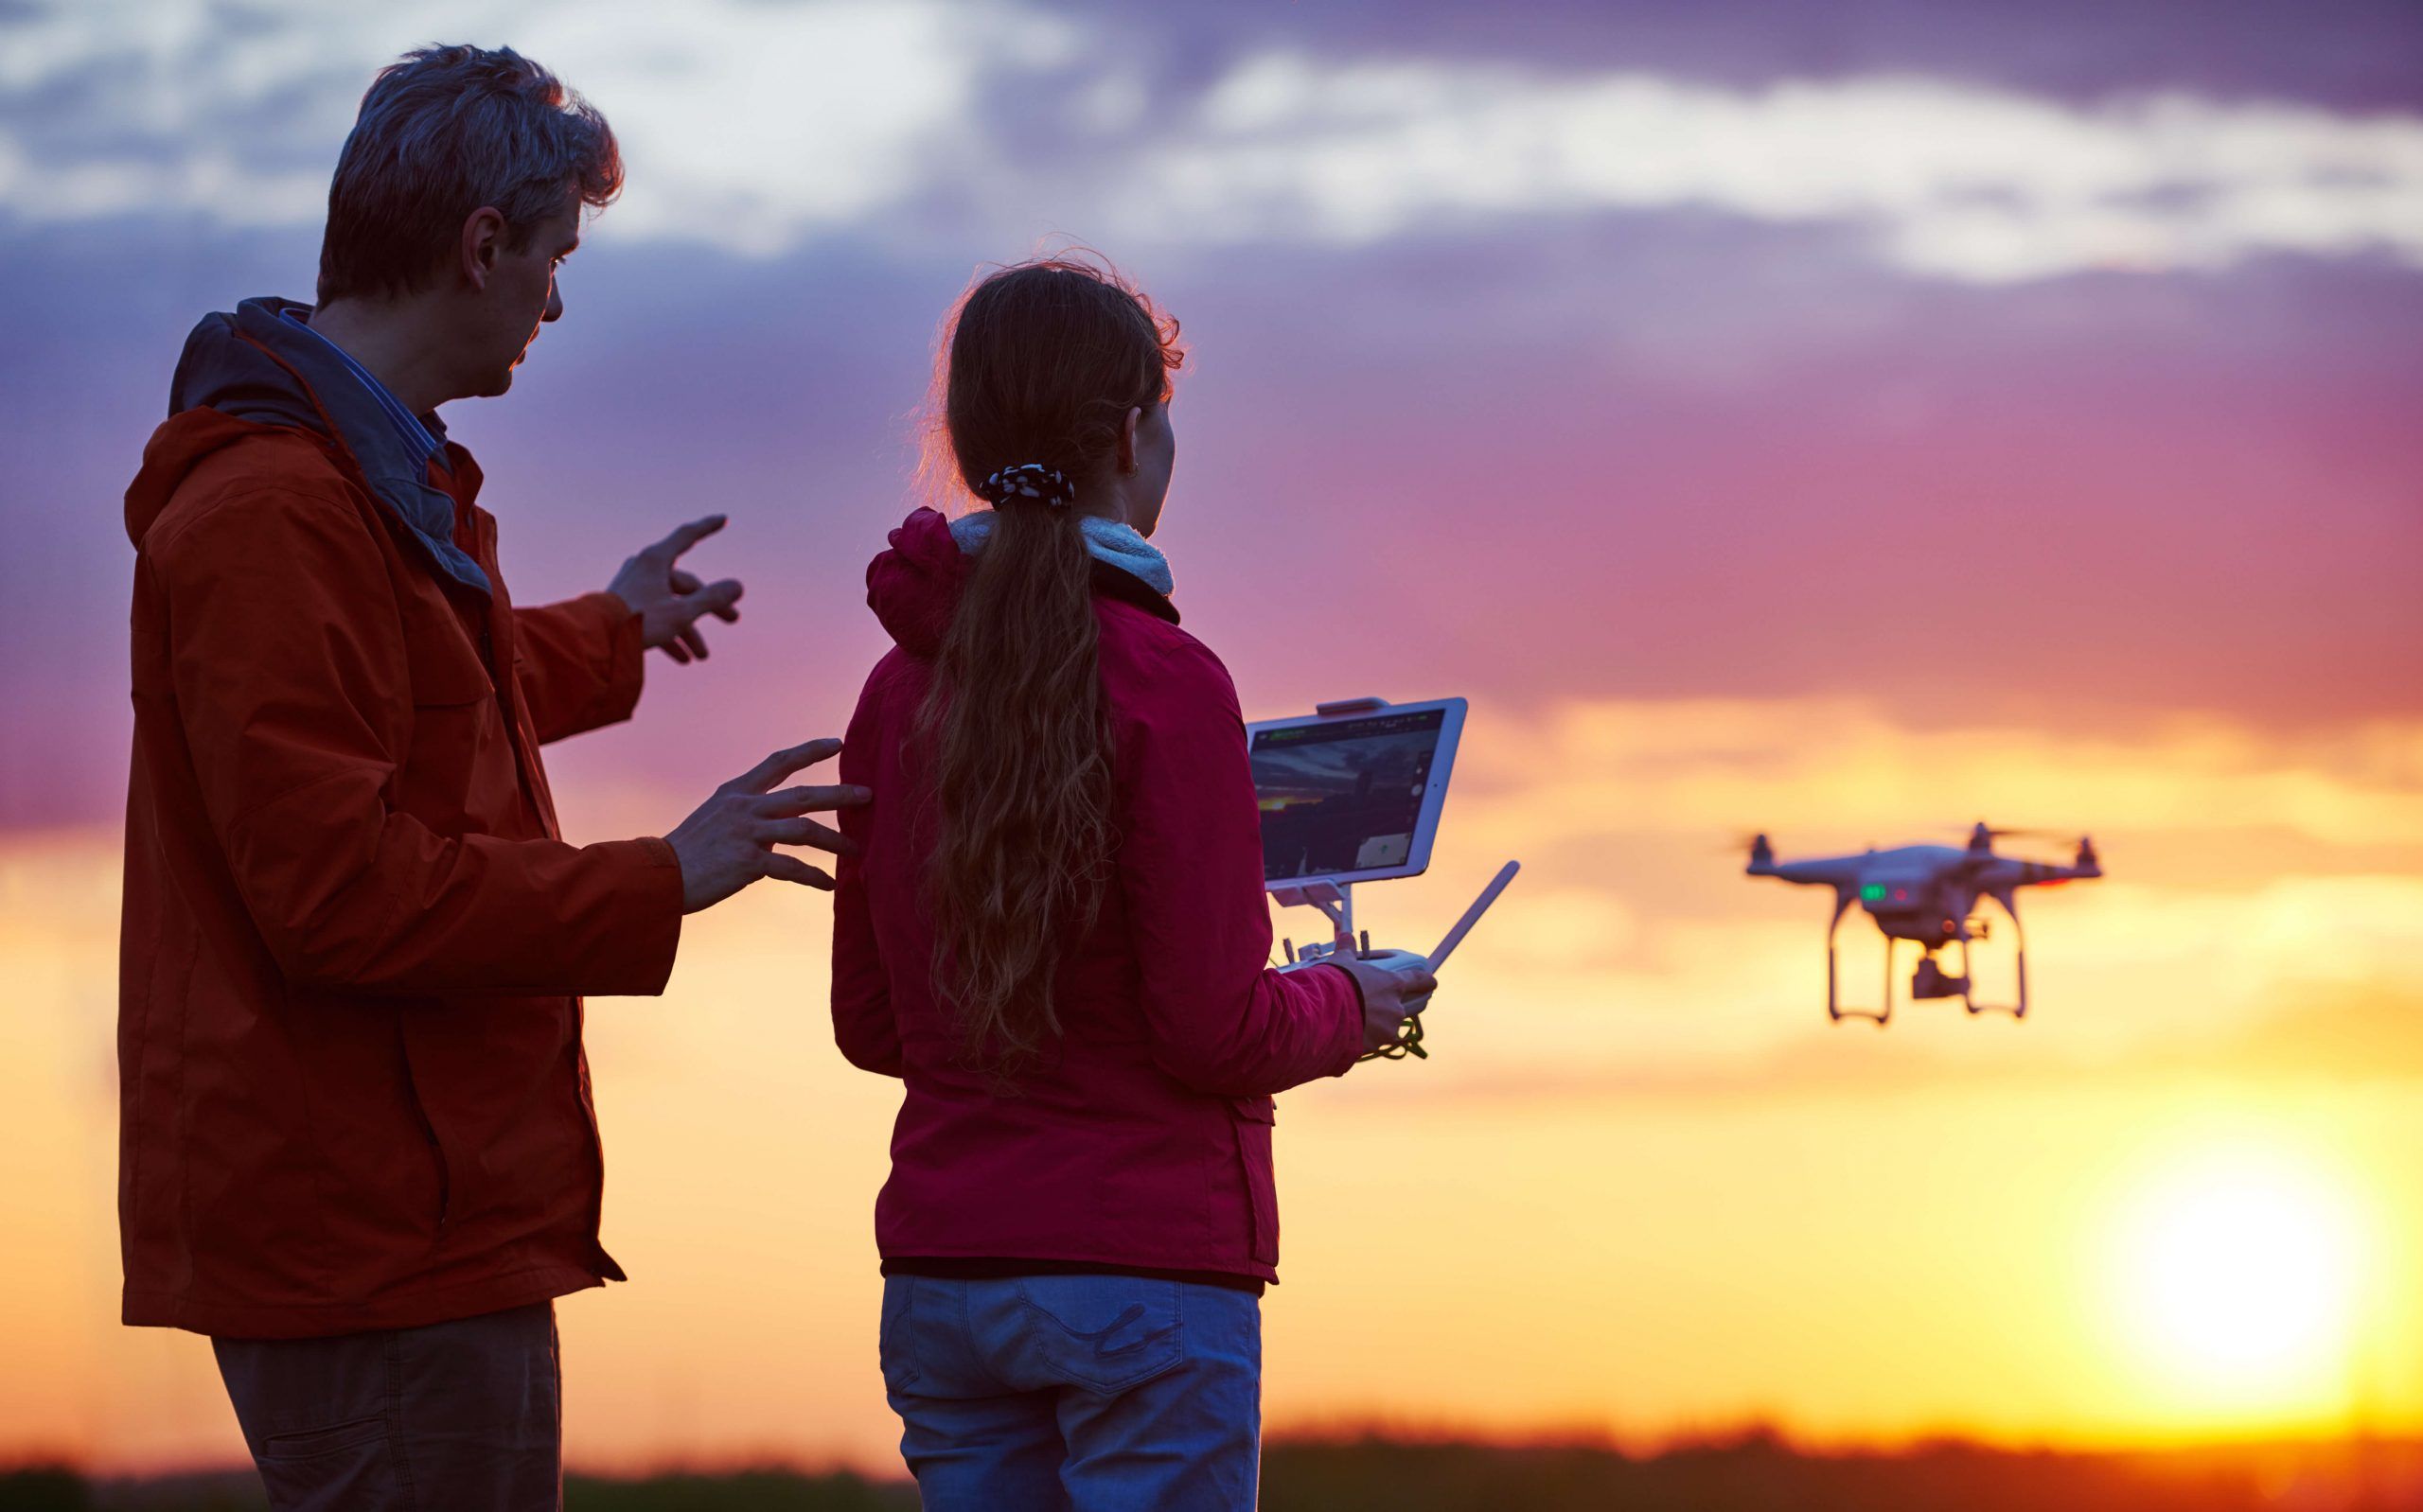 Two drone operators using photogrammetry software on tablet in front of sunset